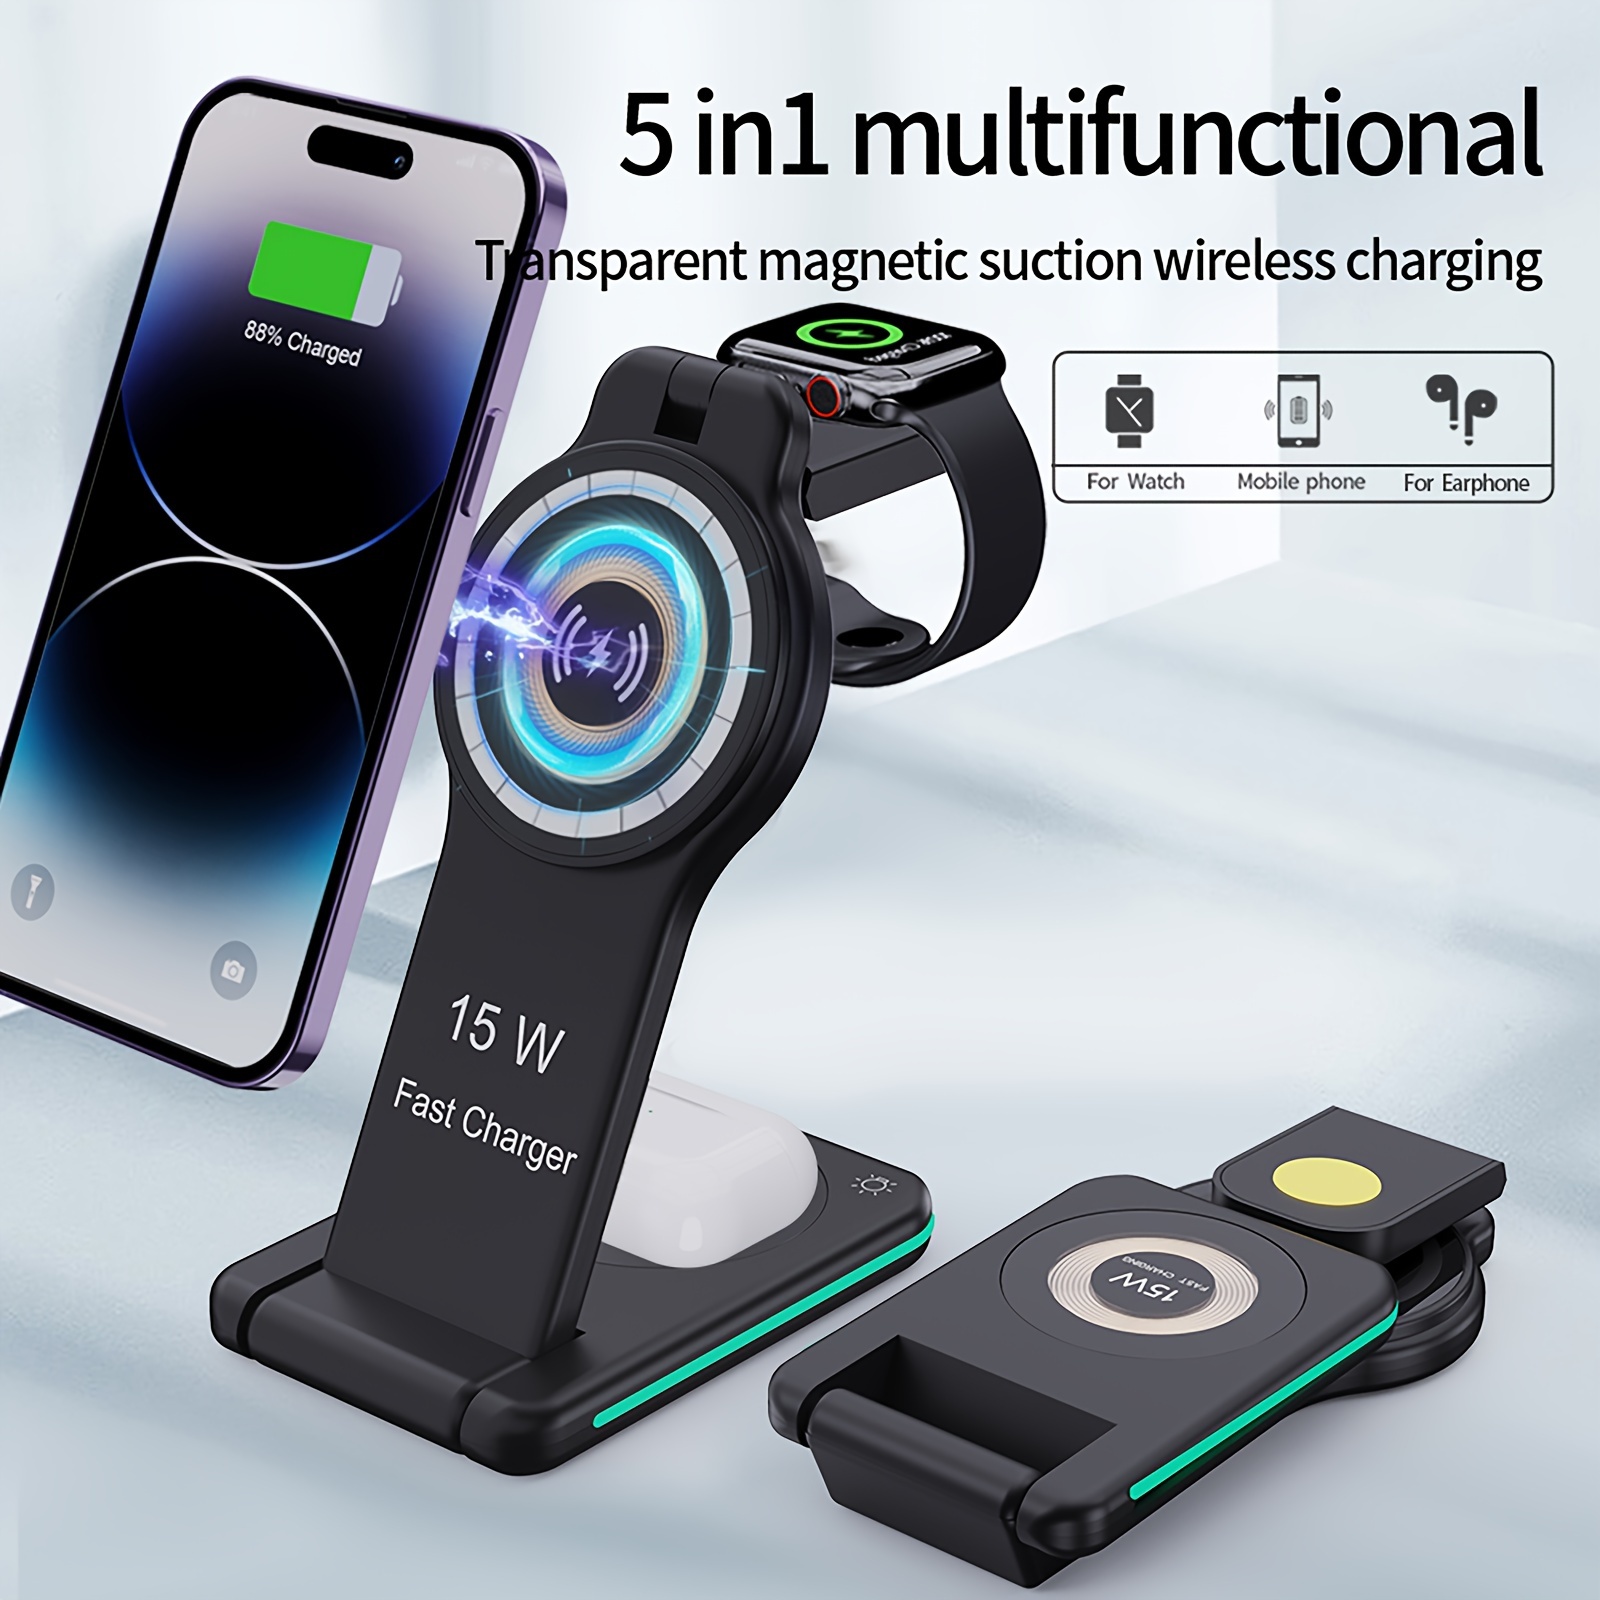 Charging - MAG Battery Pack